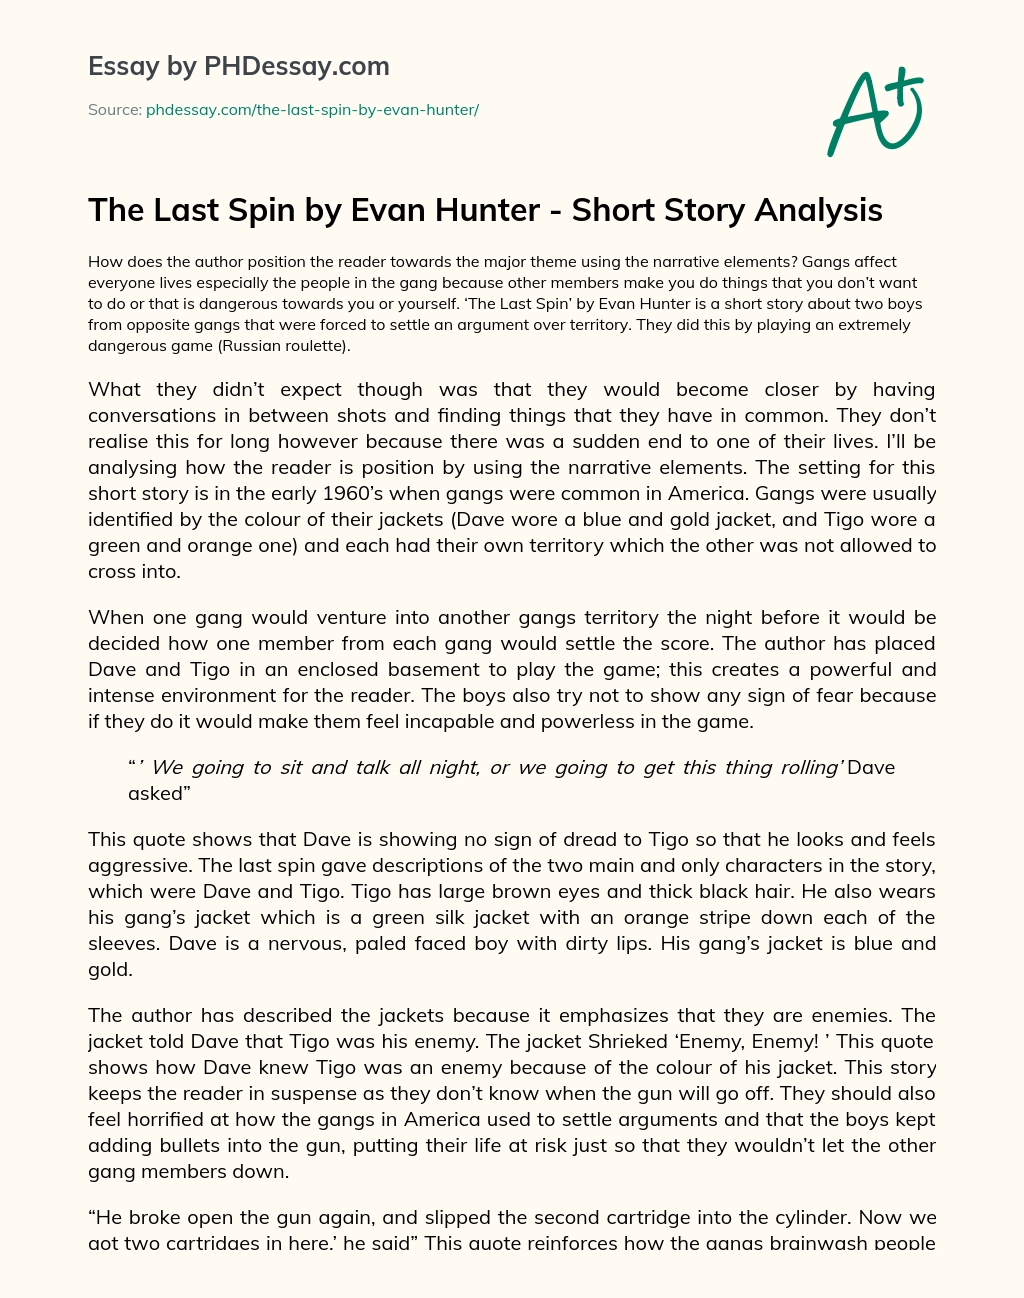 The Last Spin by Evan Hunter – Short Story Analysis essay